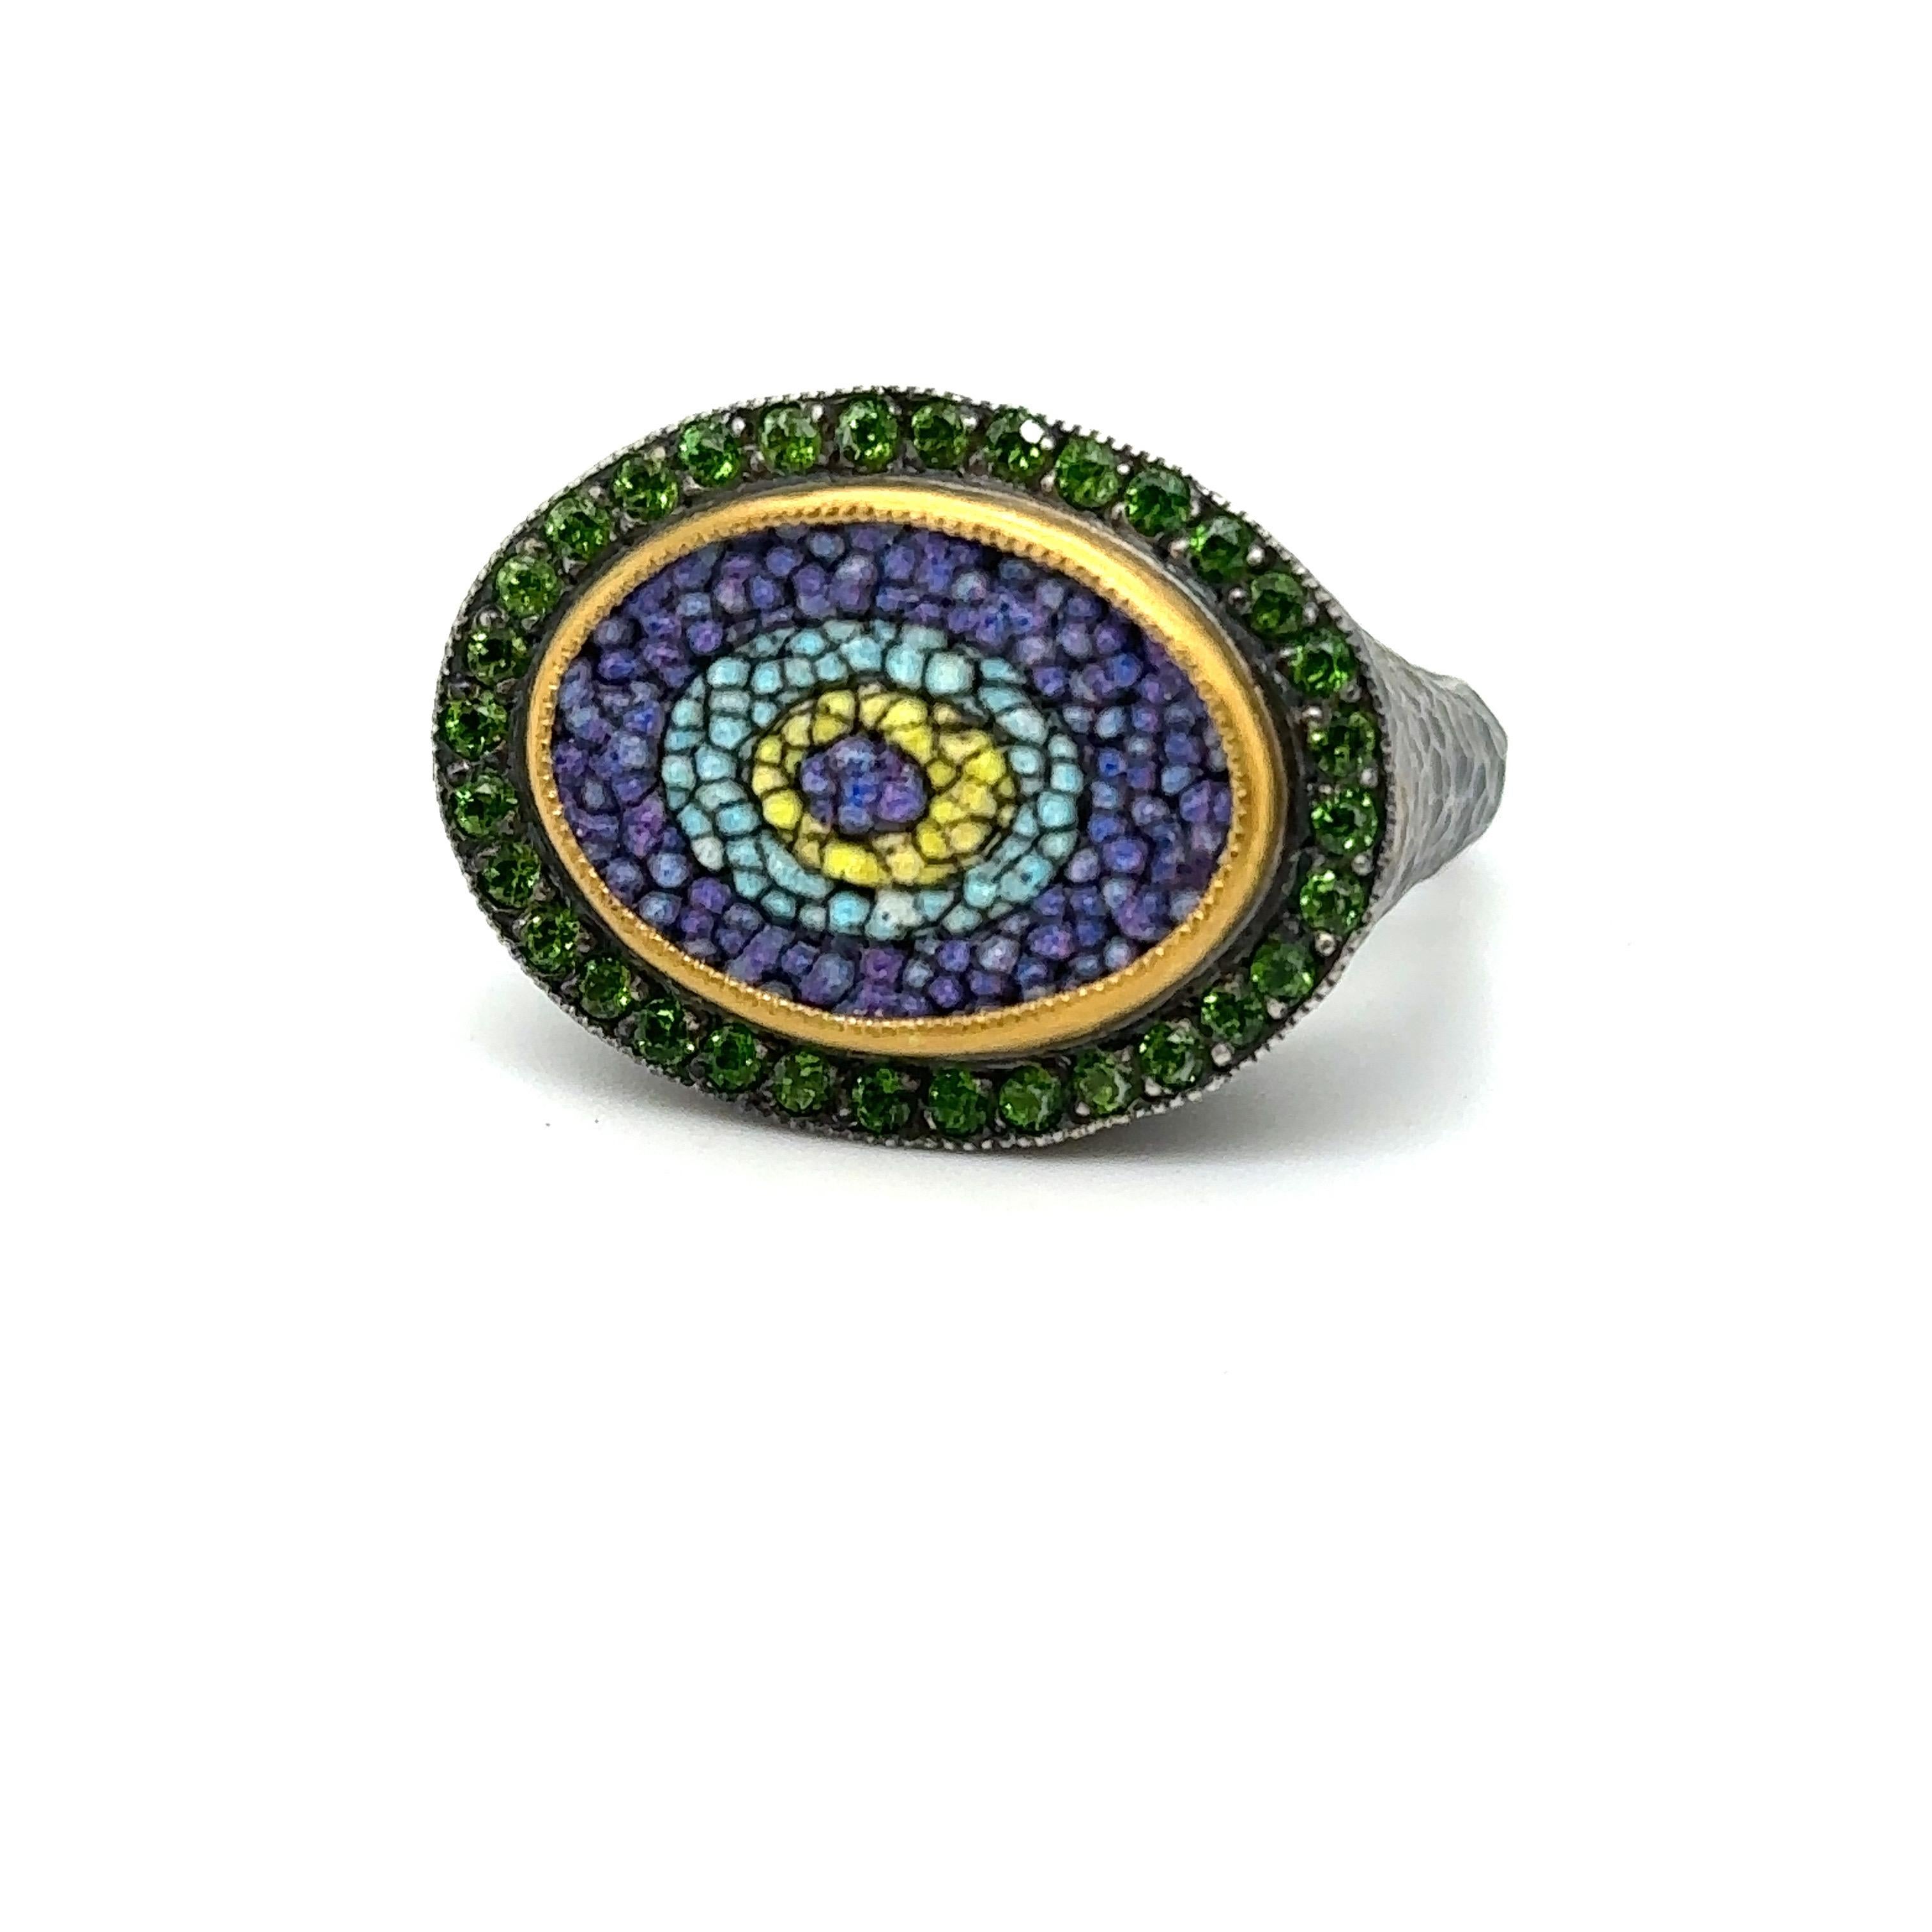 Women's JAS-19-1965 - 24KT GOLD/SS EVIL EYE MOSAIC RING with 0.60CT CHROME DIOPSIDES For Sale